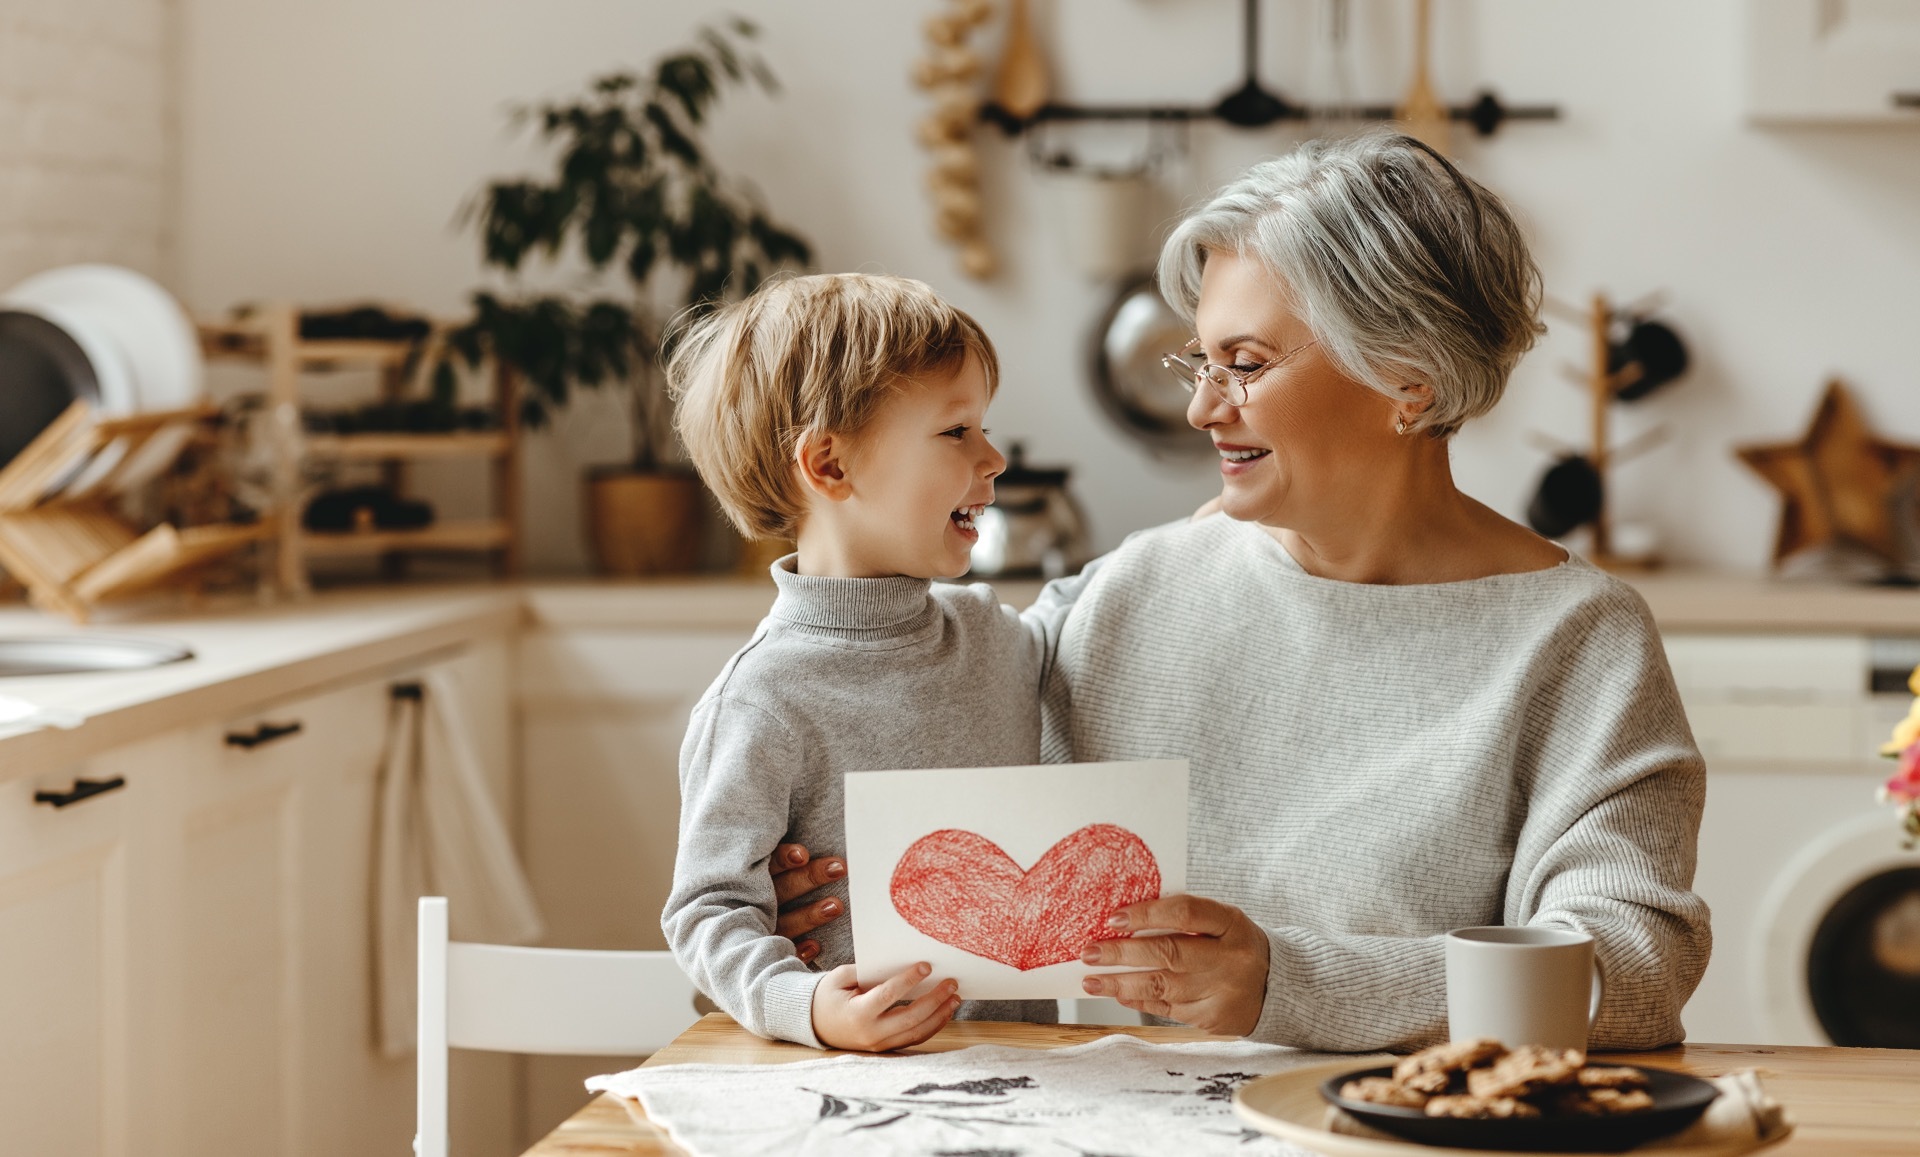 A person holding a child on their lap, with a hand-drawn heart drawing in their hands; our Wills Solicitors in Preston discuss the importance of a Will.